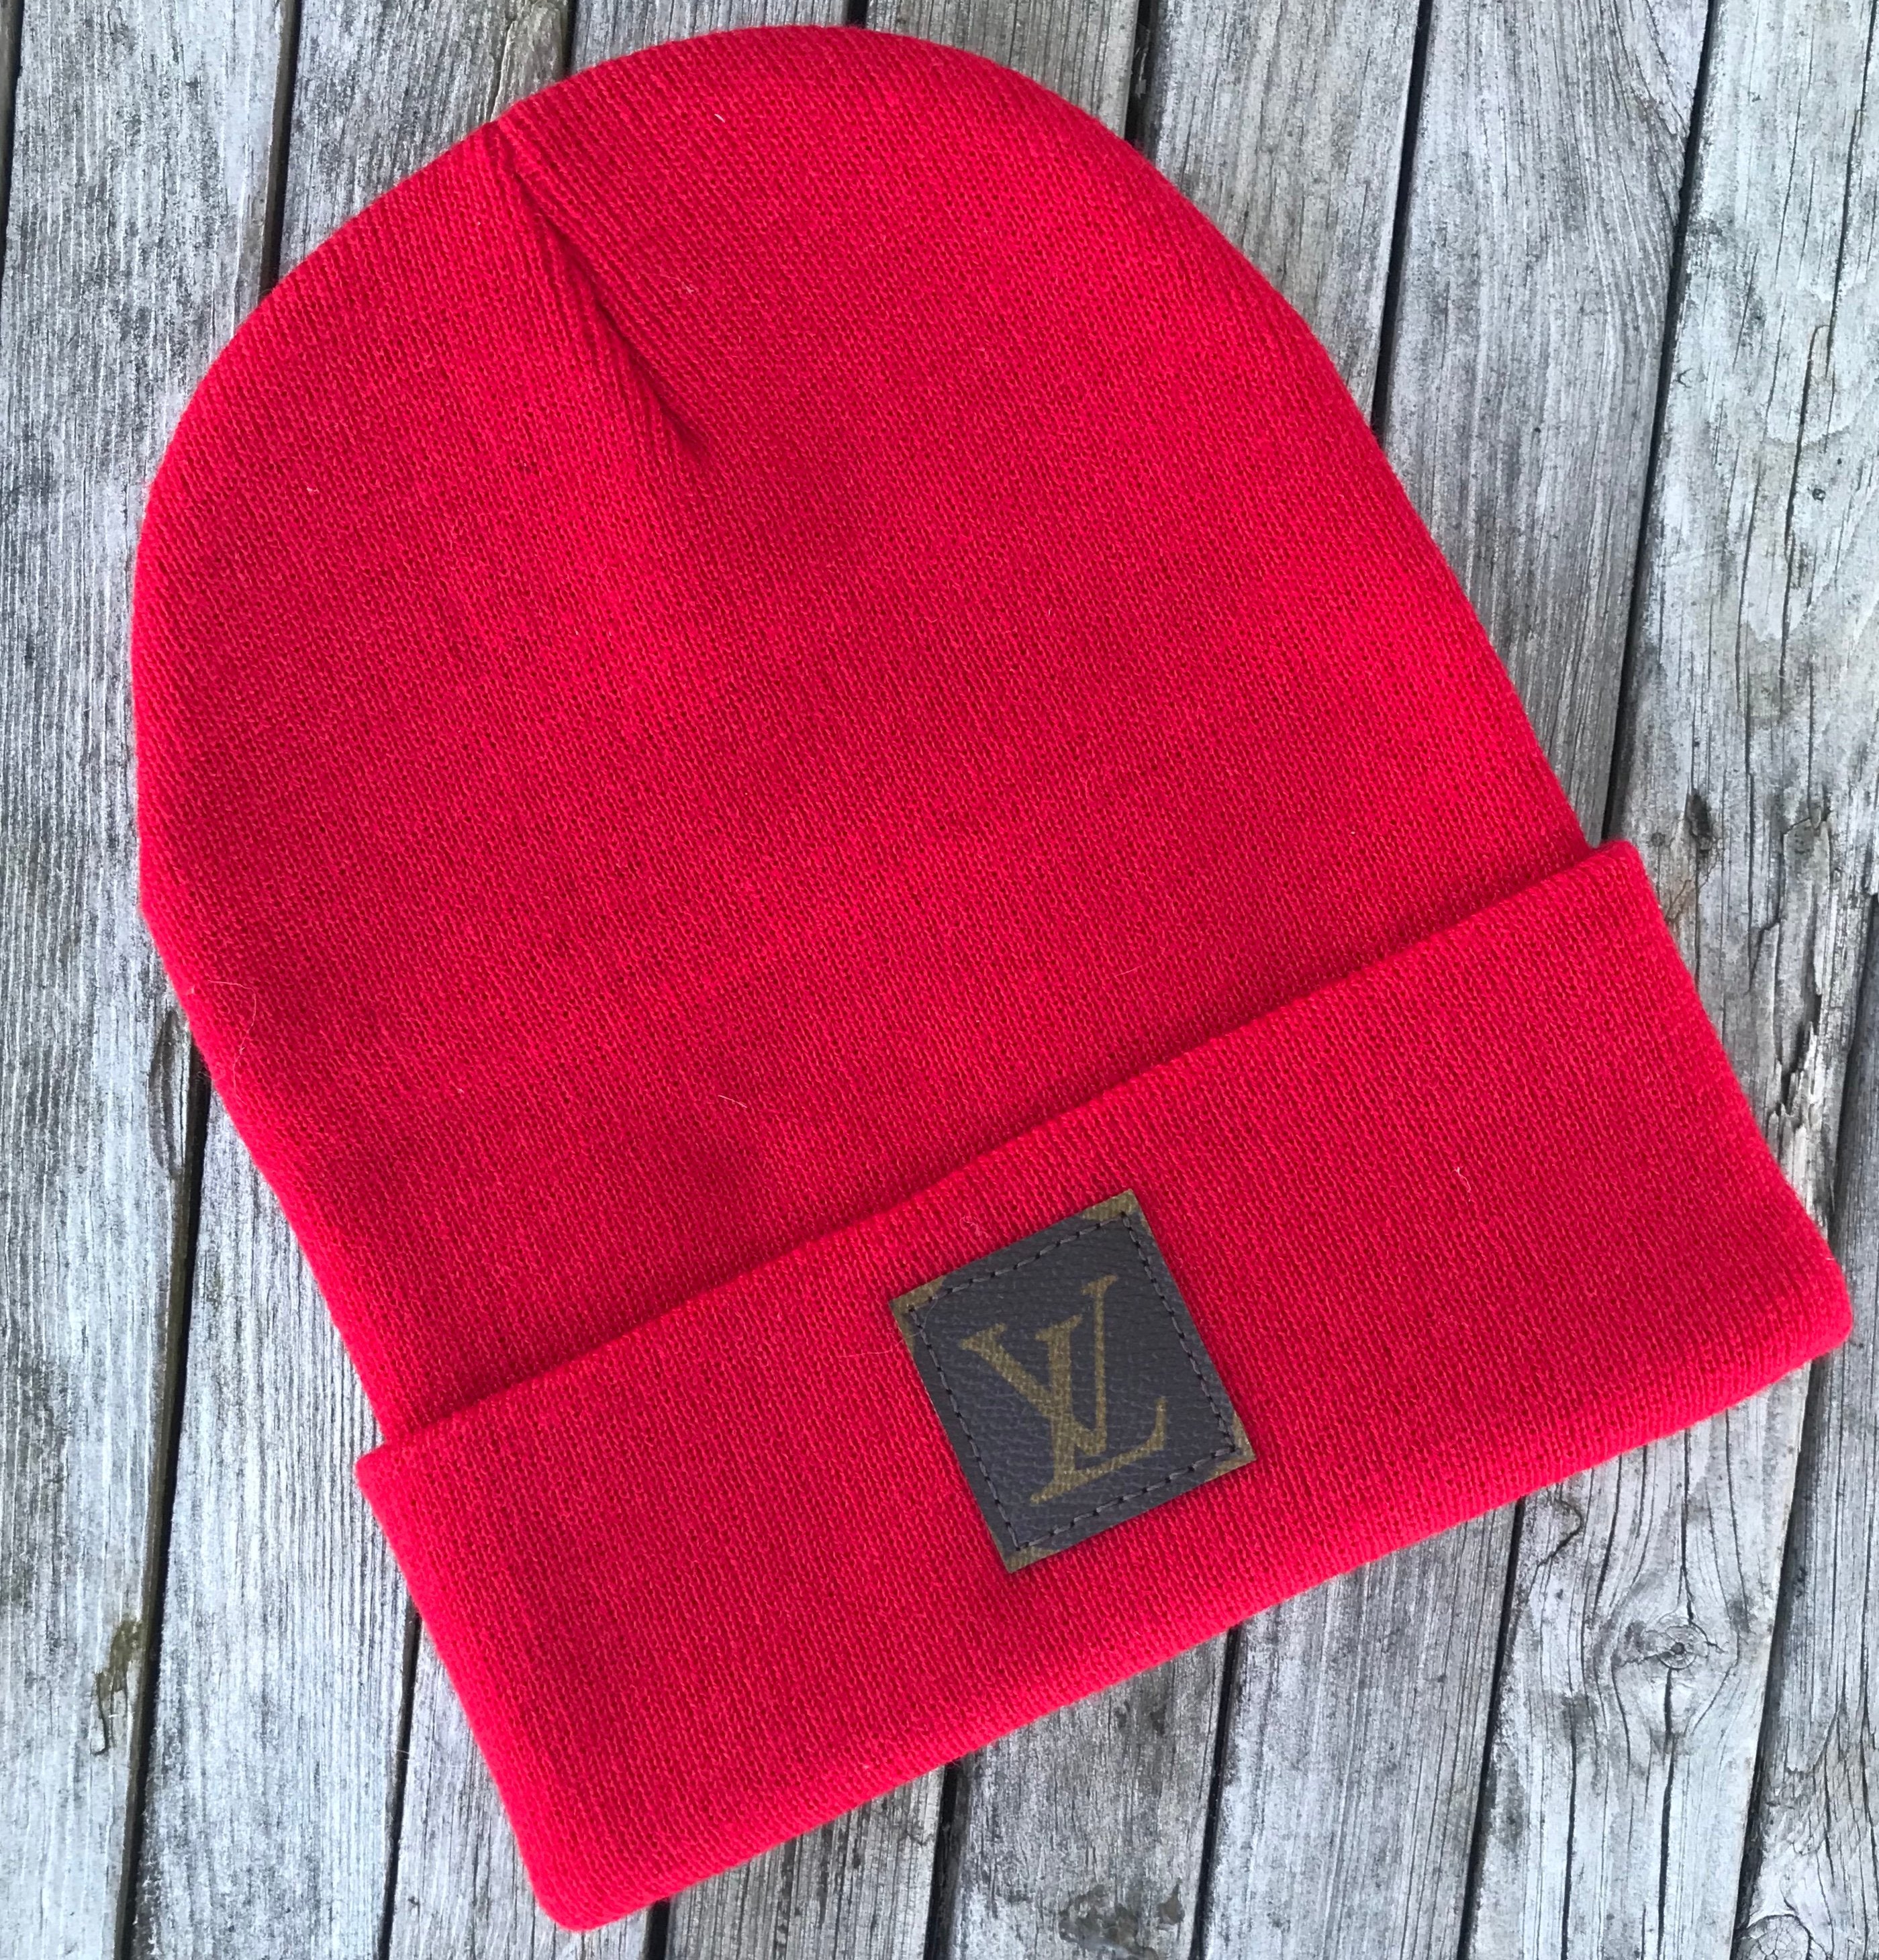 Authentic Snuggle Up Red Louis Vuitton Beanie